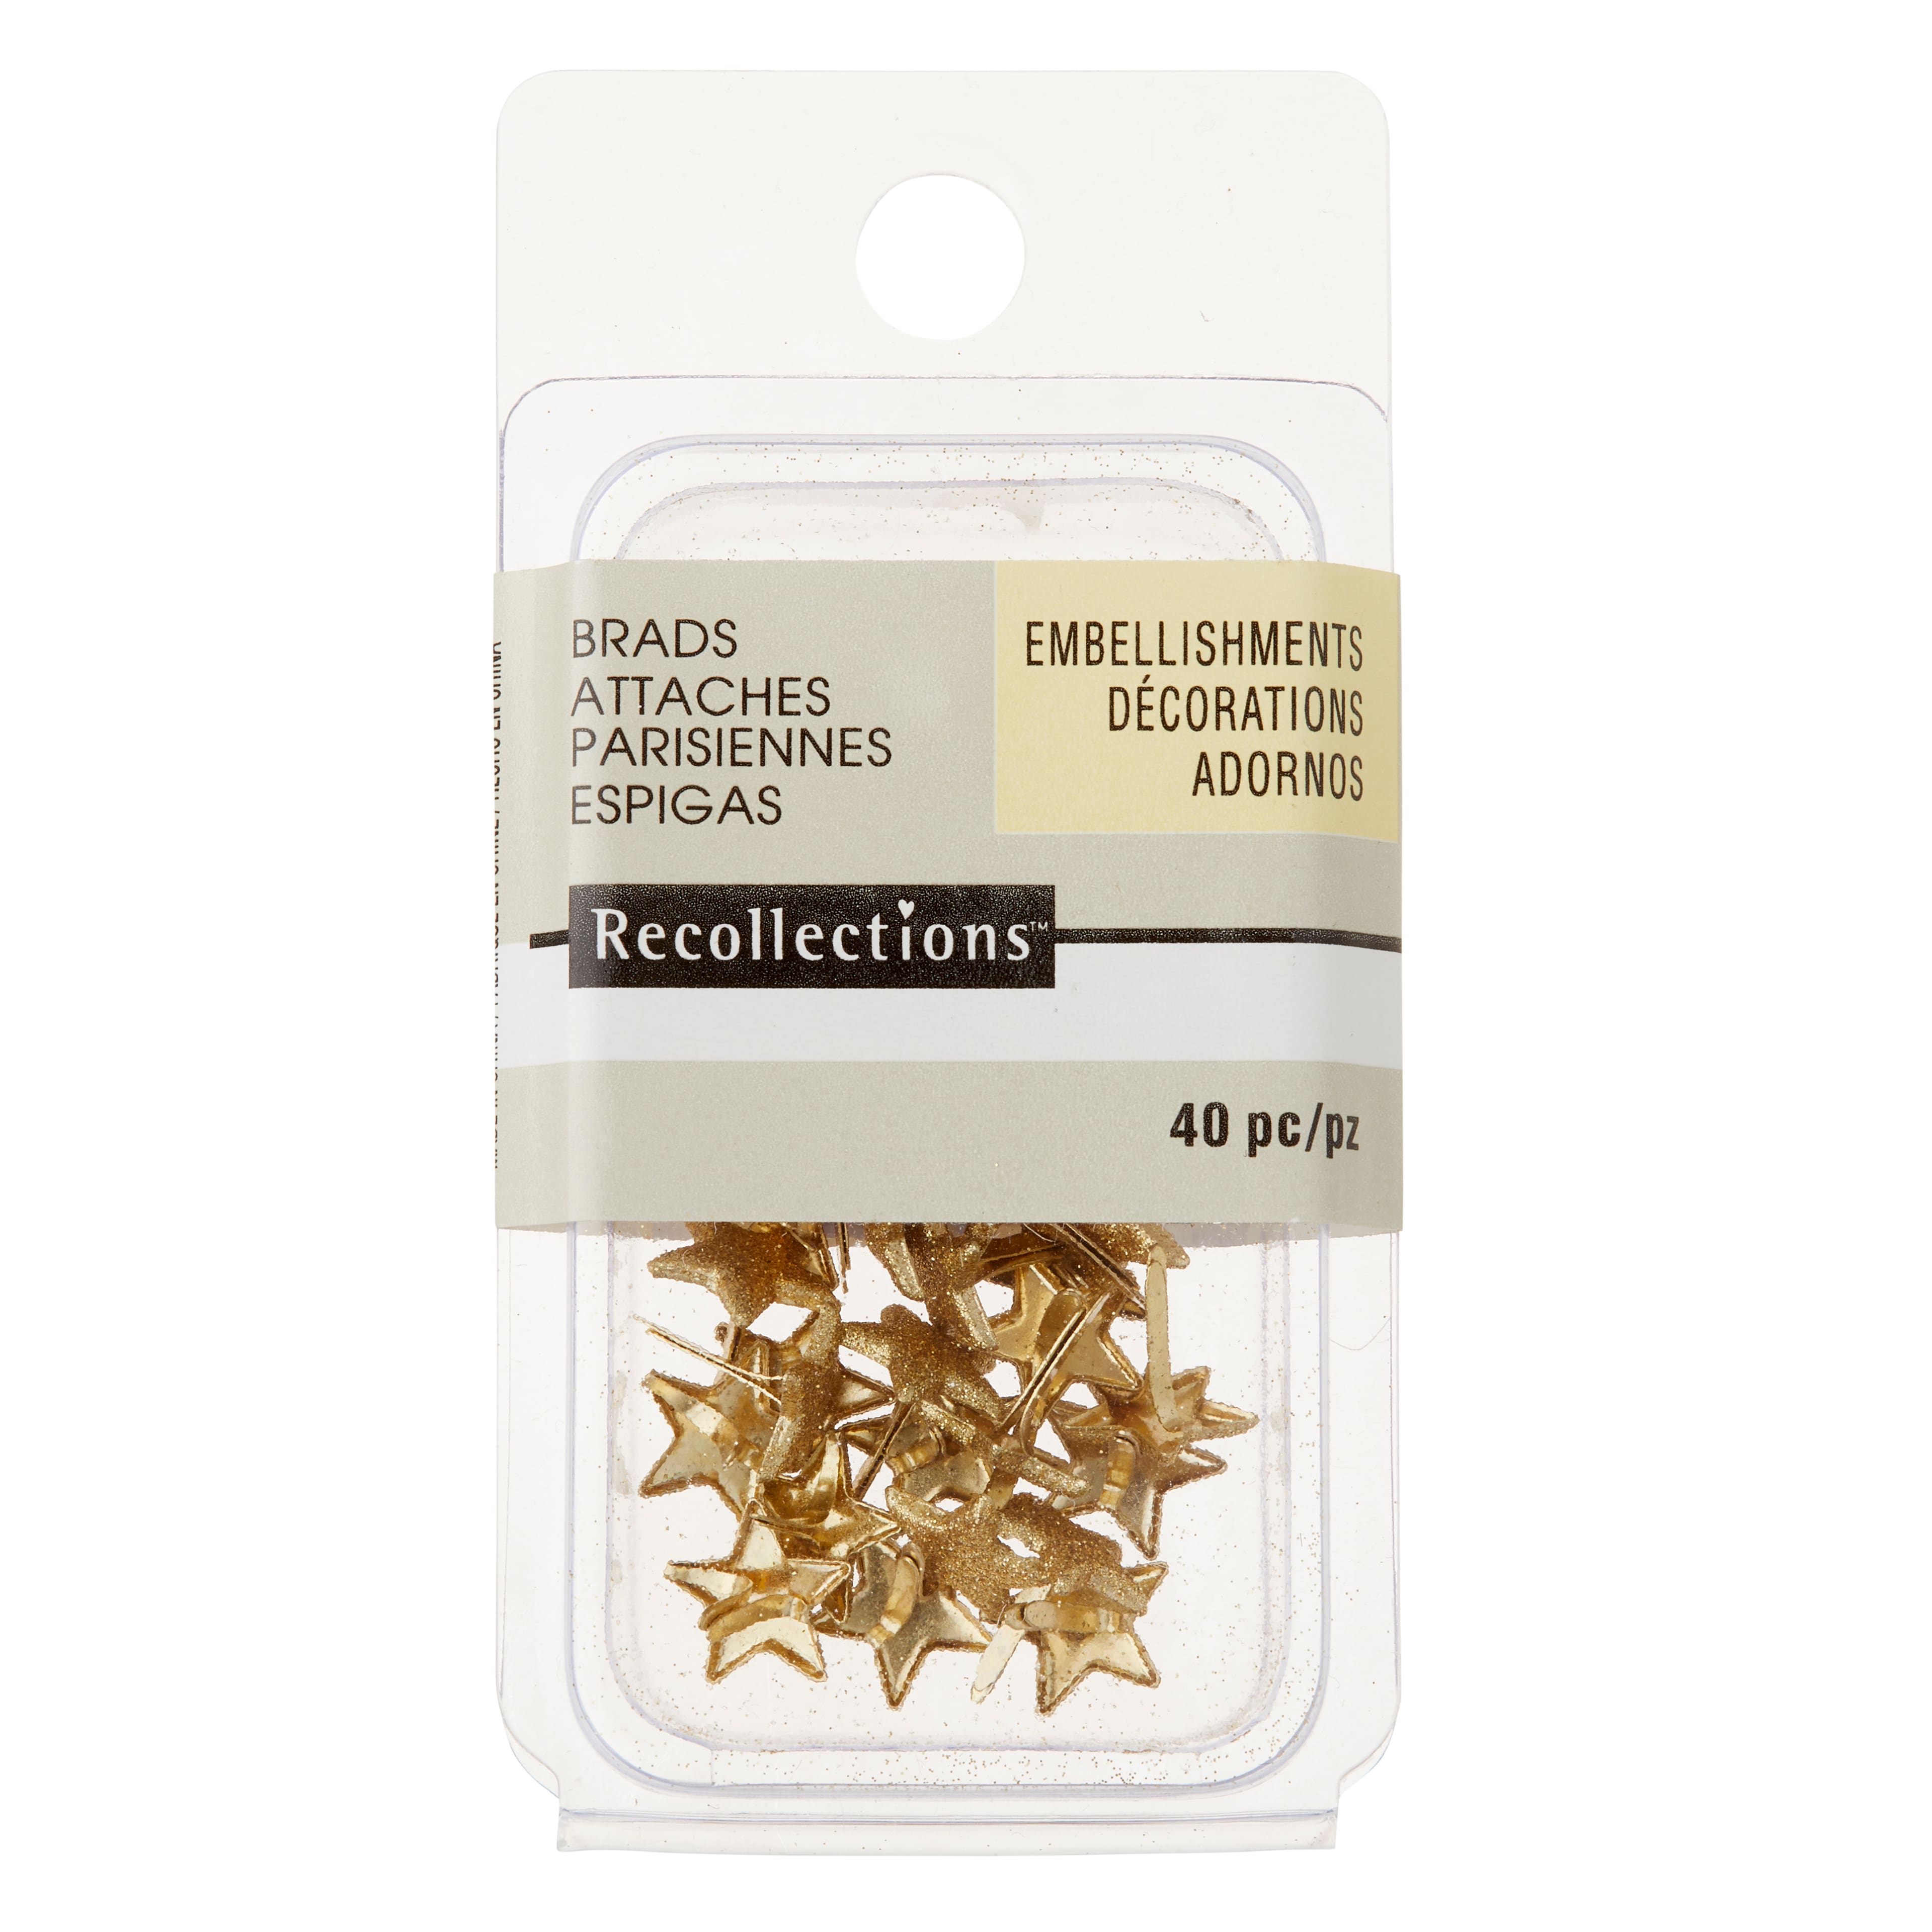 12 Packs: 200 ct. (2,400 total) Metallic Brads by Recollections™